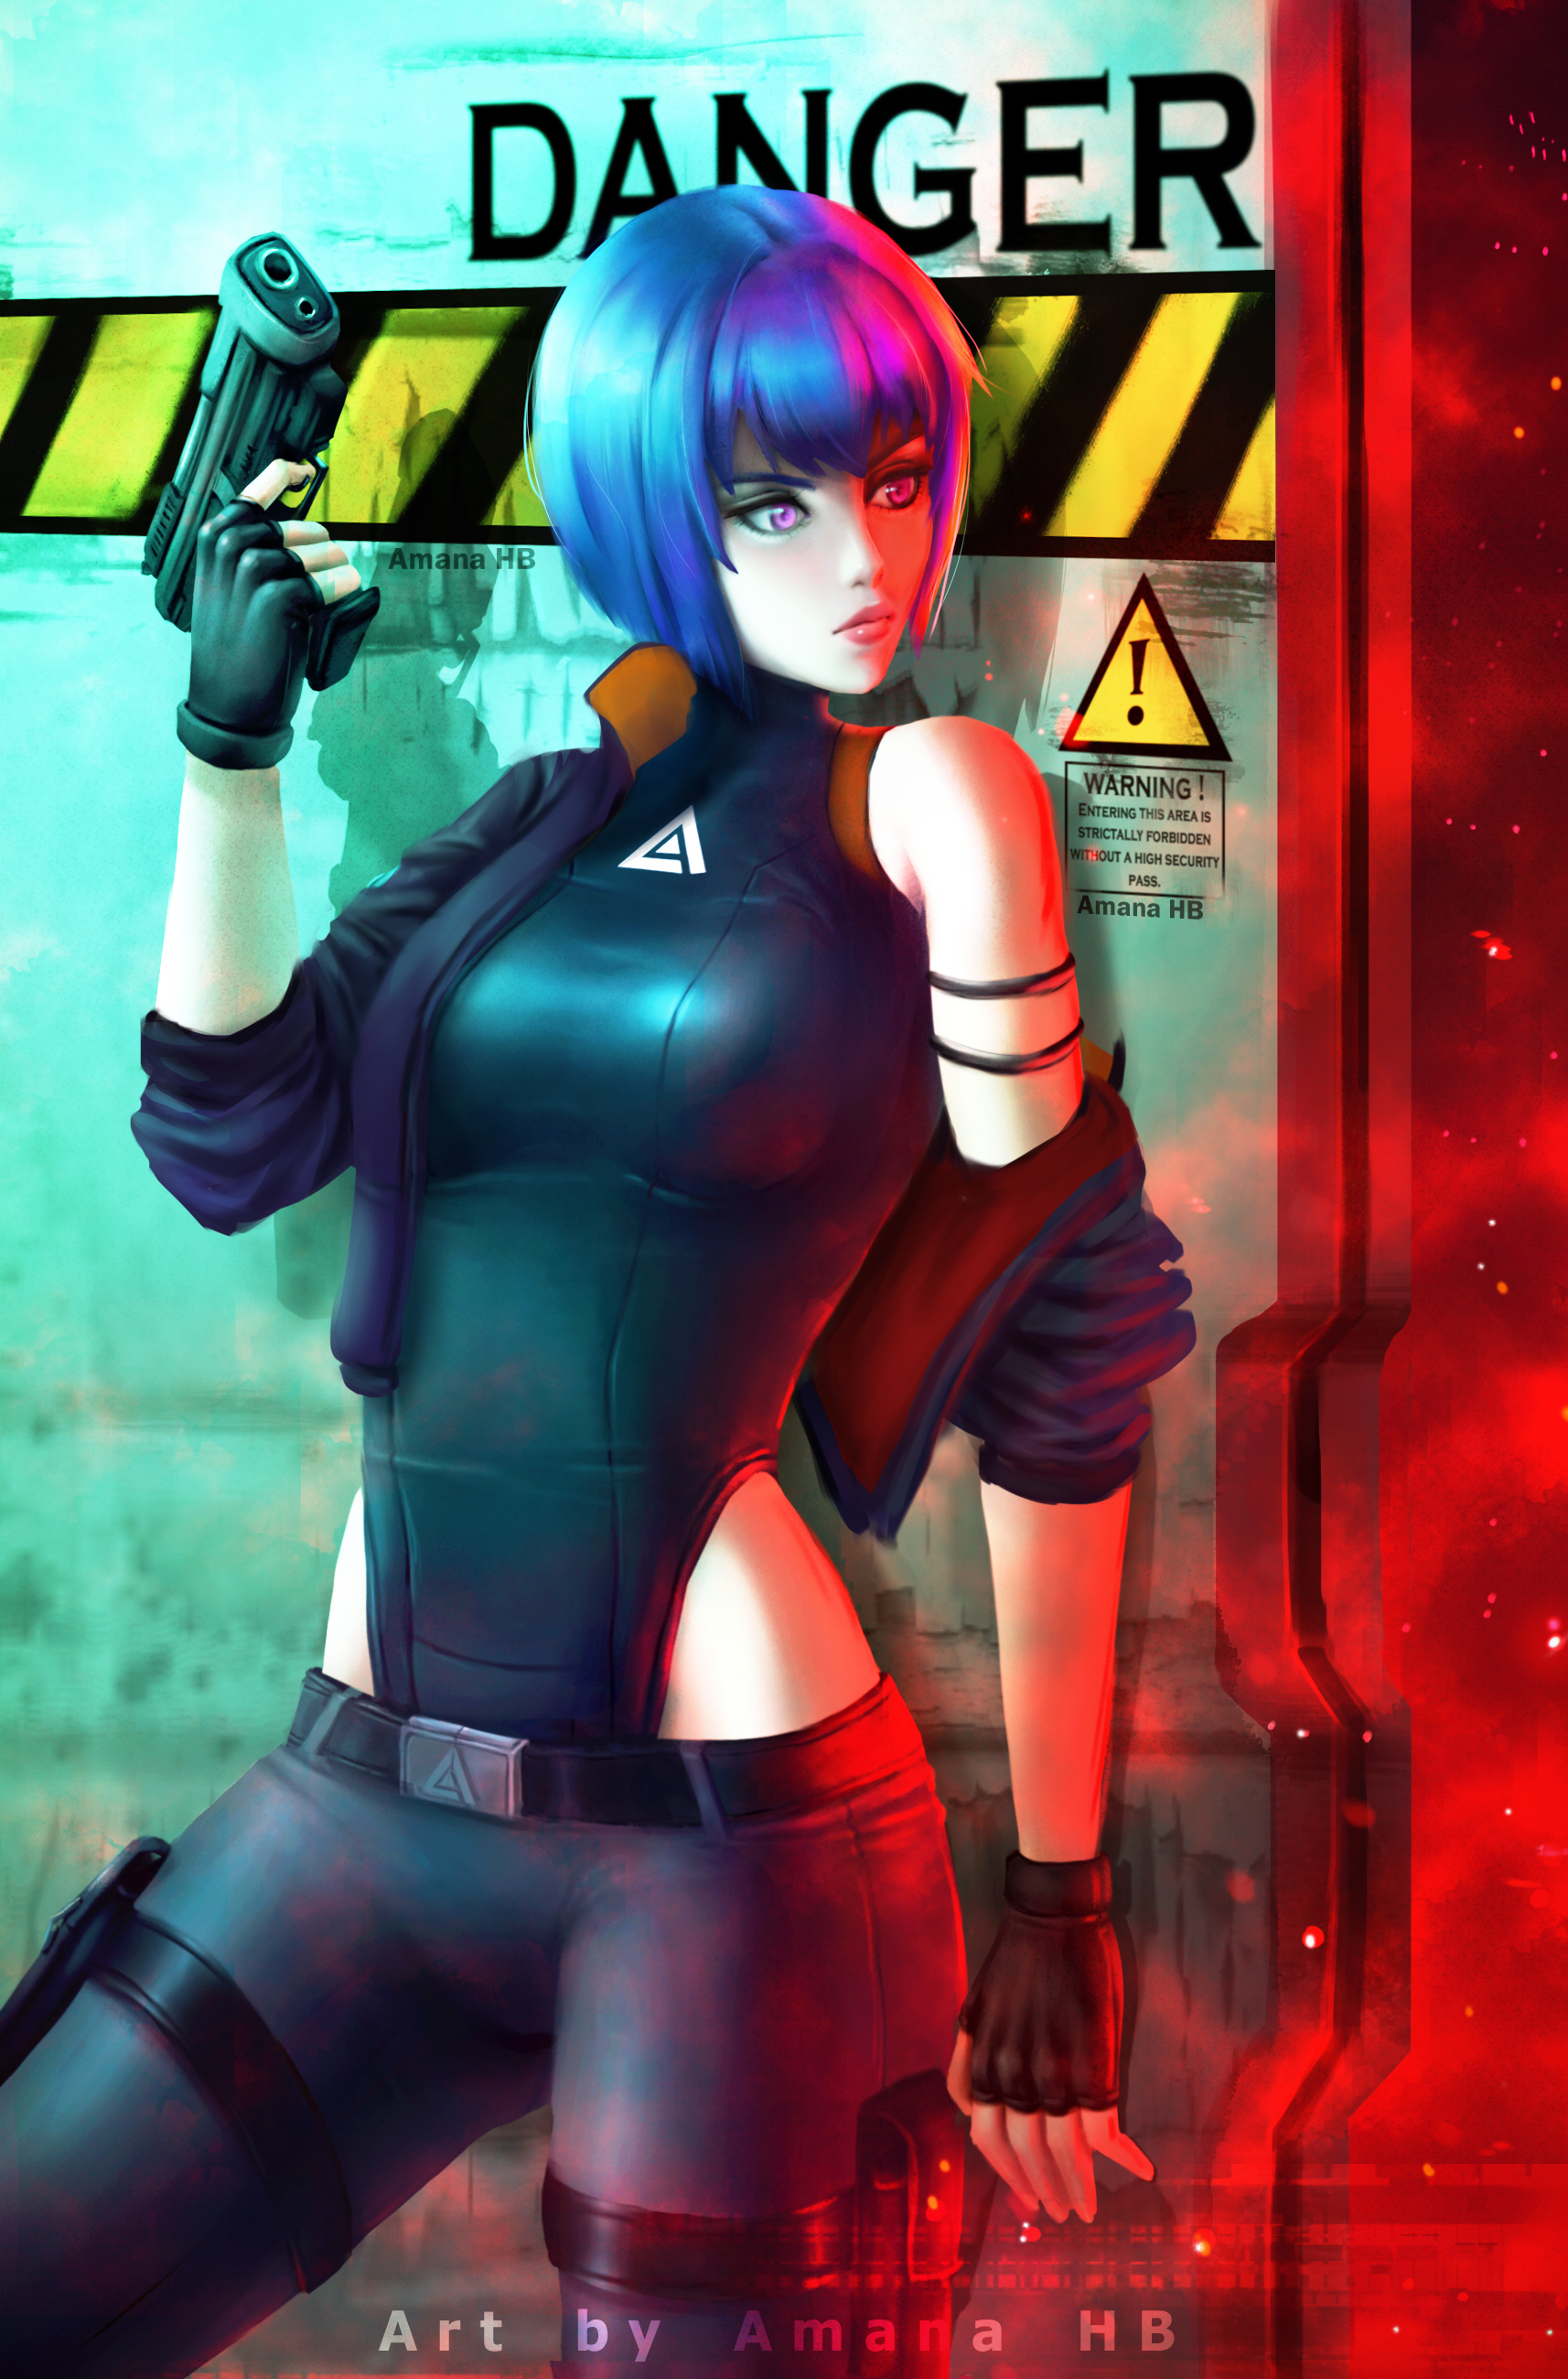 ghost in the shell sac_2045 (jacket version1) by Amana_HB